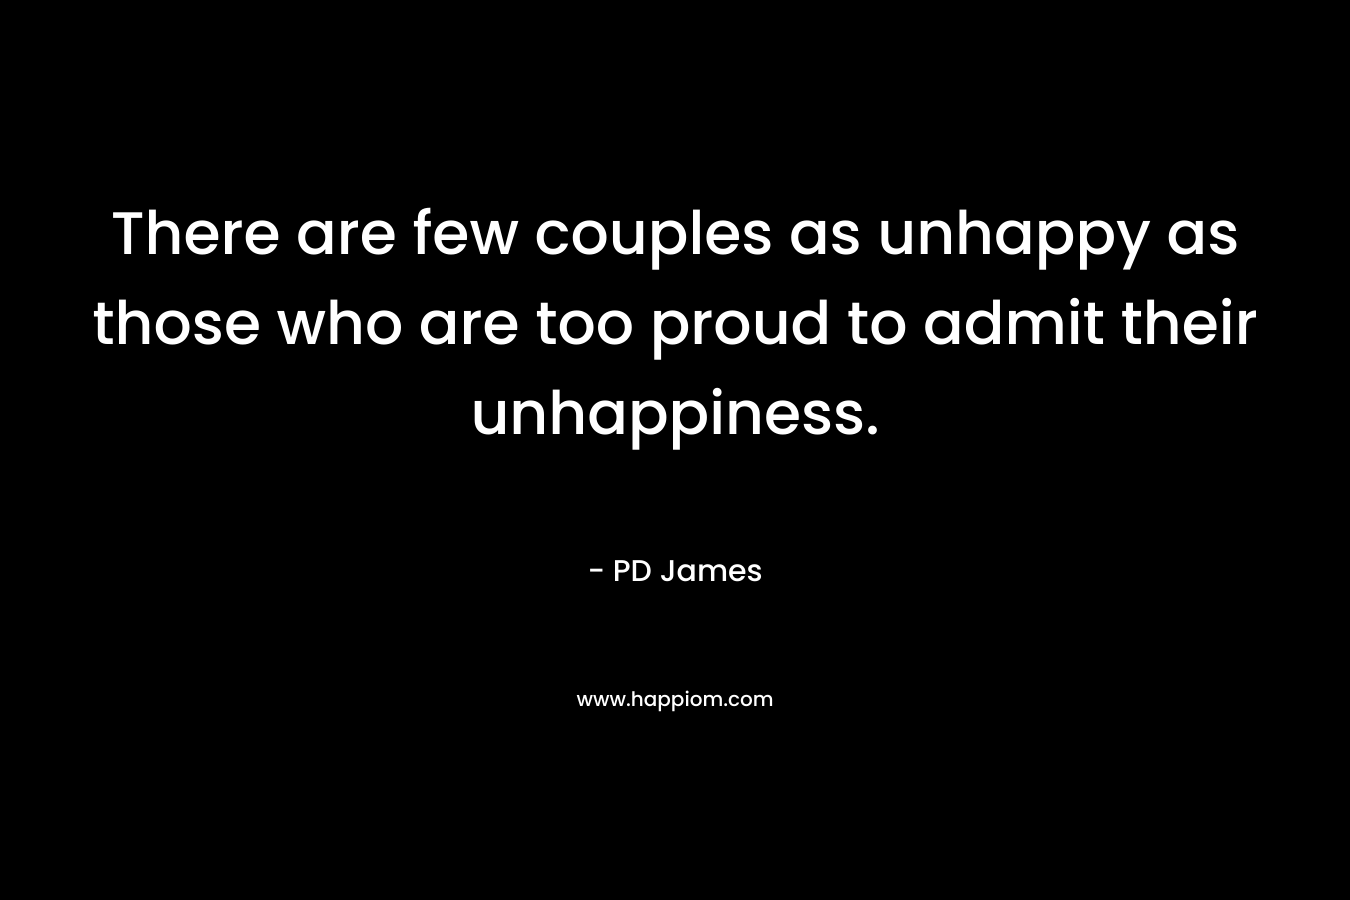 There are few couples as unhappy as those who are too proud to admit their unhappiness. – PD James